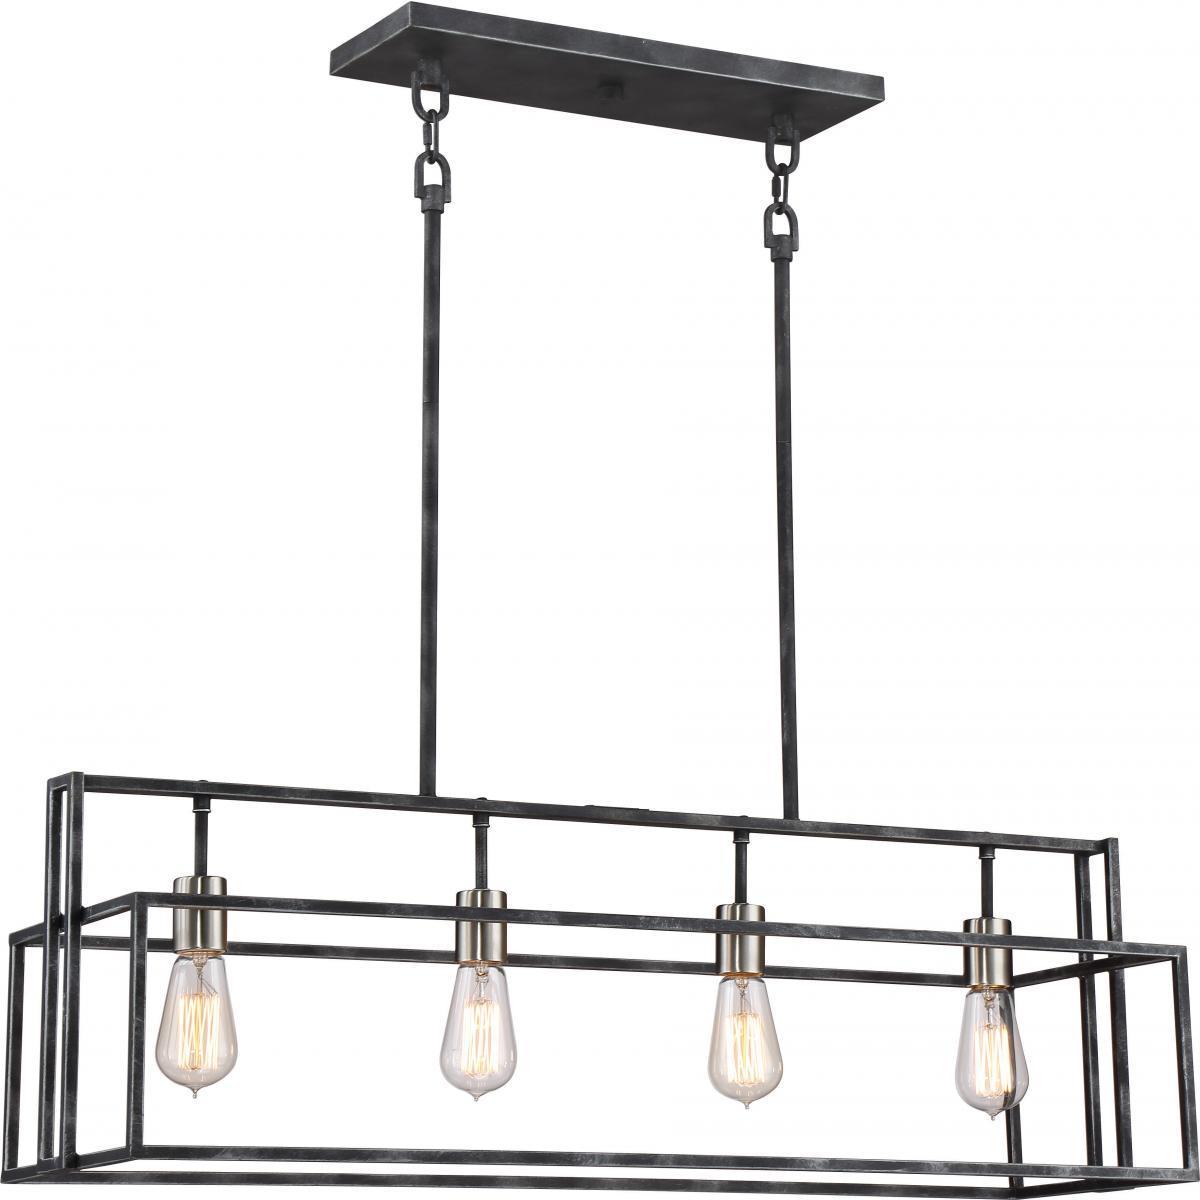 Lake 4 Light Island Pendant Iron Black with Brushed Nickel Accents Finish Ceiling Nuvo Lighting 